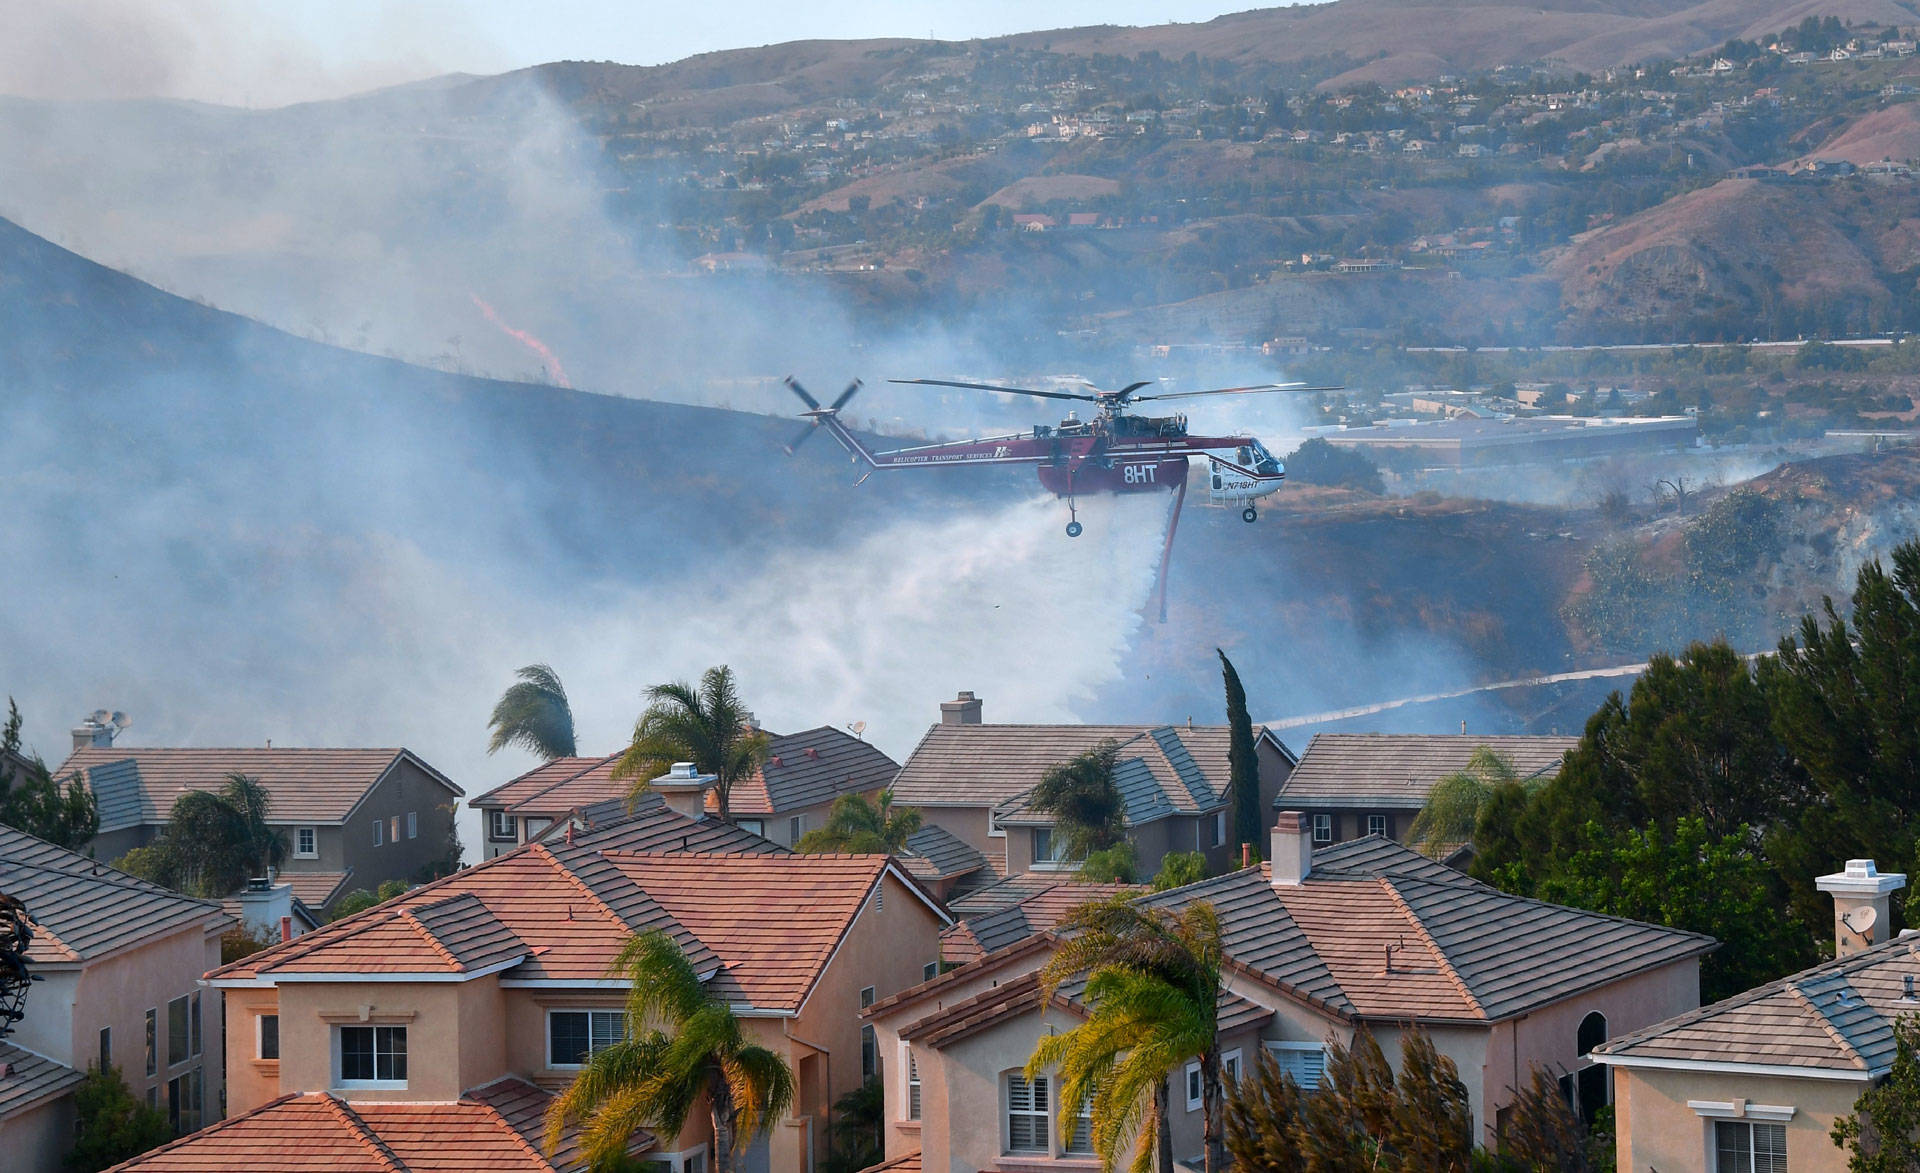 A helicopter drops water near homes in the Anaheim Hills neighborhood on Oct. 9, 2017. Orange County experienced rapid growth in housing construction in fire-prone areas between 1990 and 2010. FREDERIC J. BROWN/AFP/Getty Images